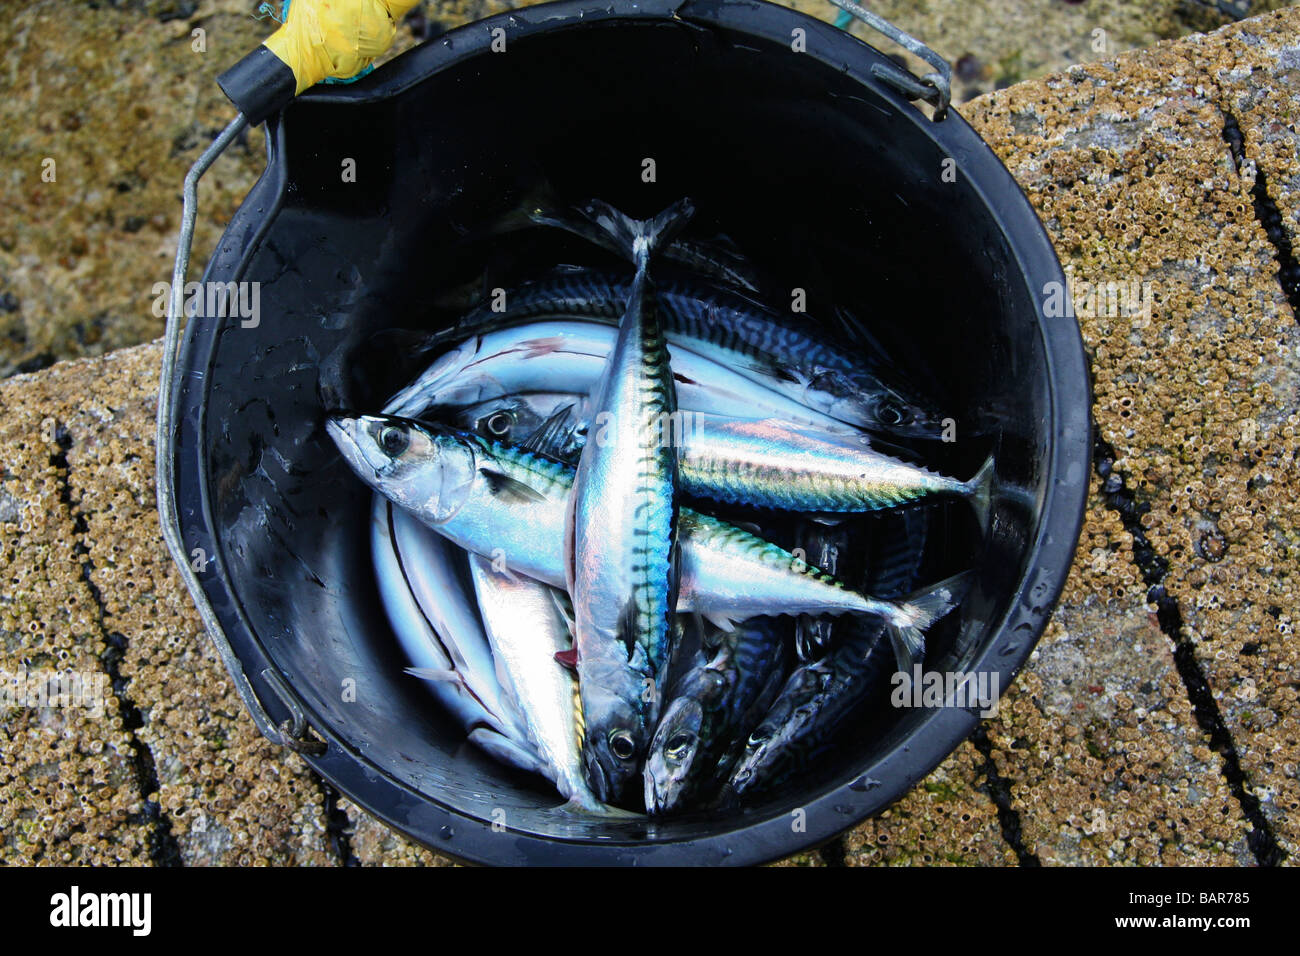 A bucket of fresh mackrel fish caught off the Island of Staffa, famous for Fingal's Cave, is made from volcanic Basalt rocks. Stock Photo